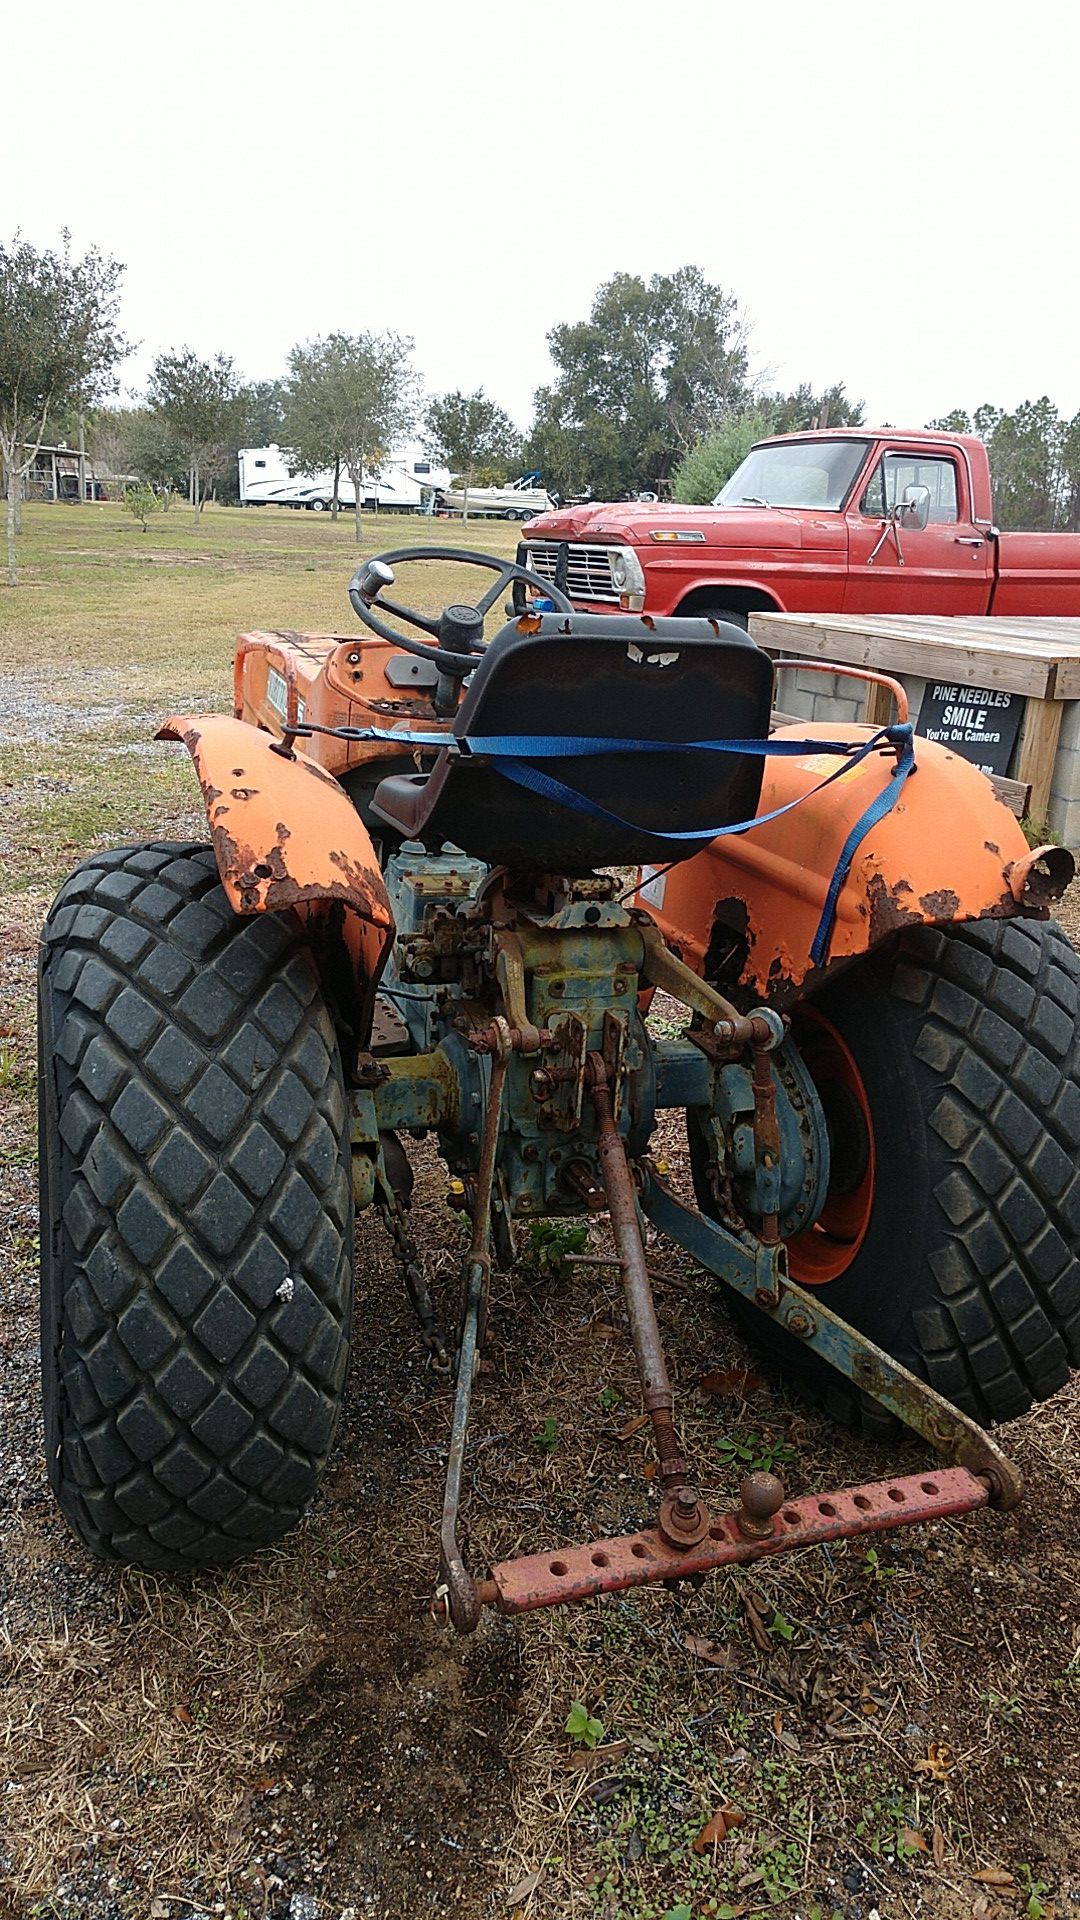 Kubota L185 Diesel Tractor For Sale In Clermont Fl Offerup